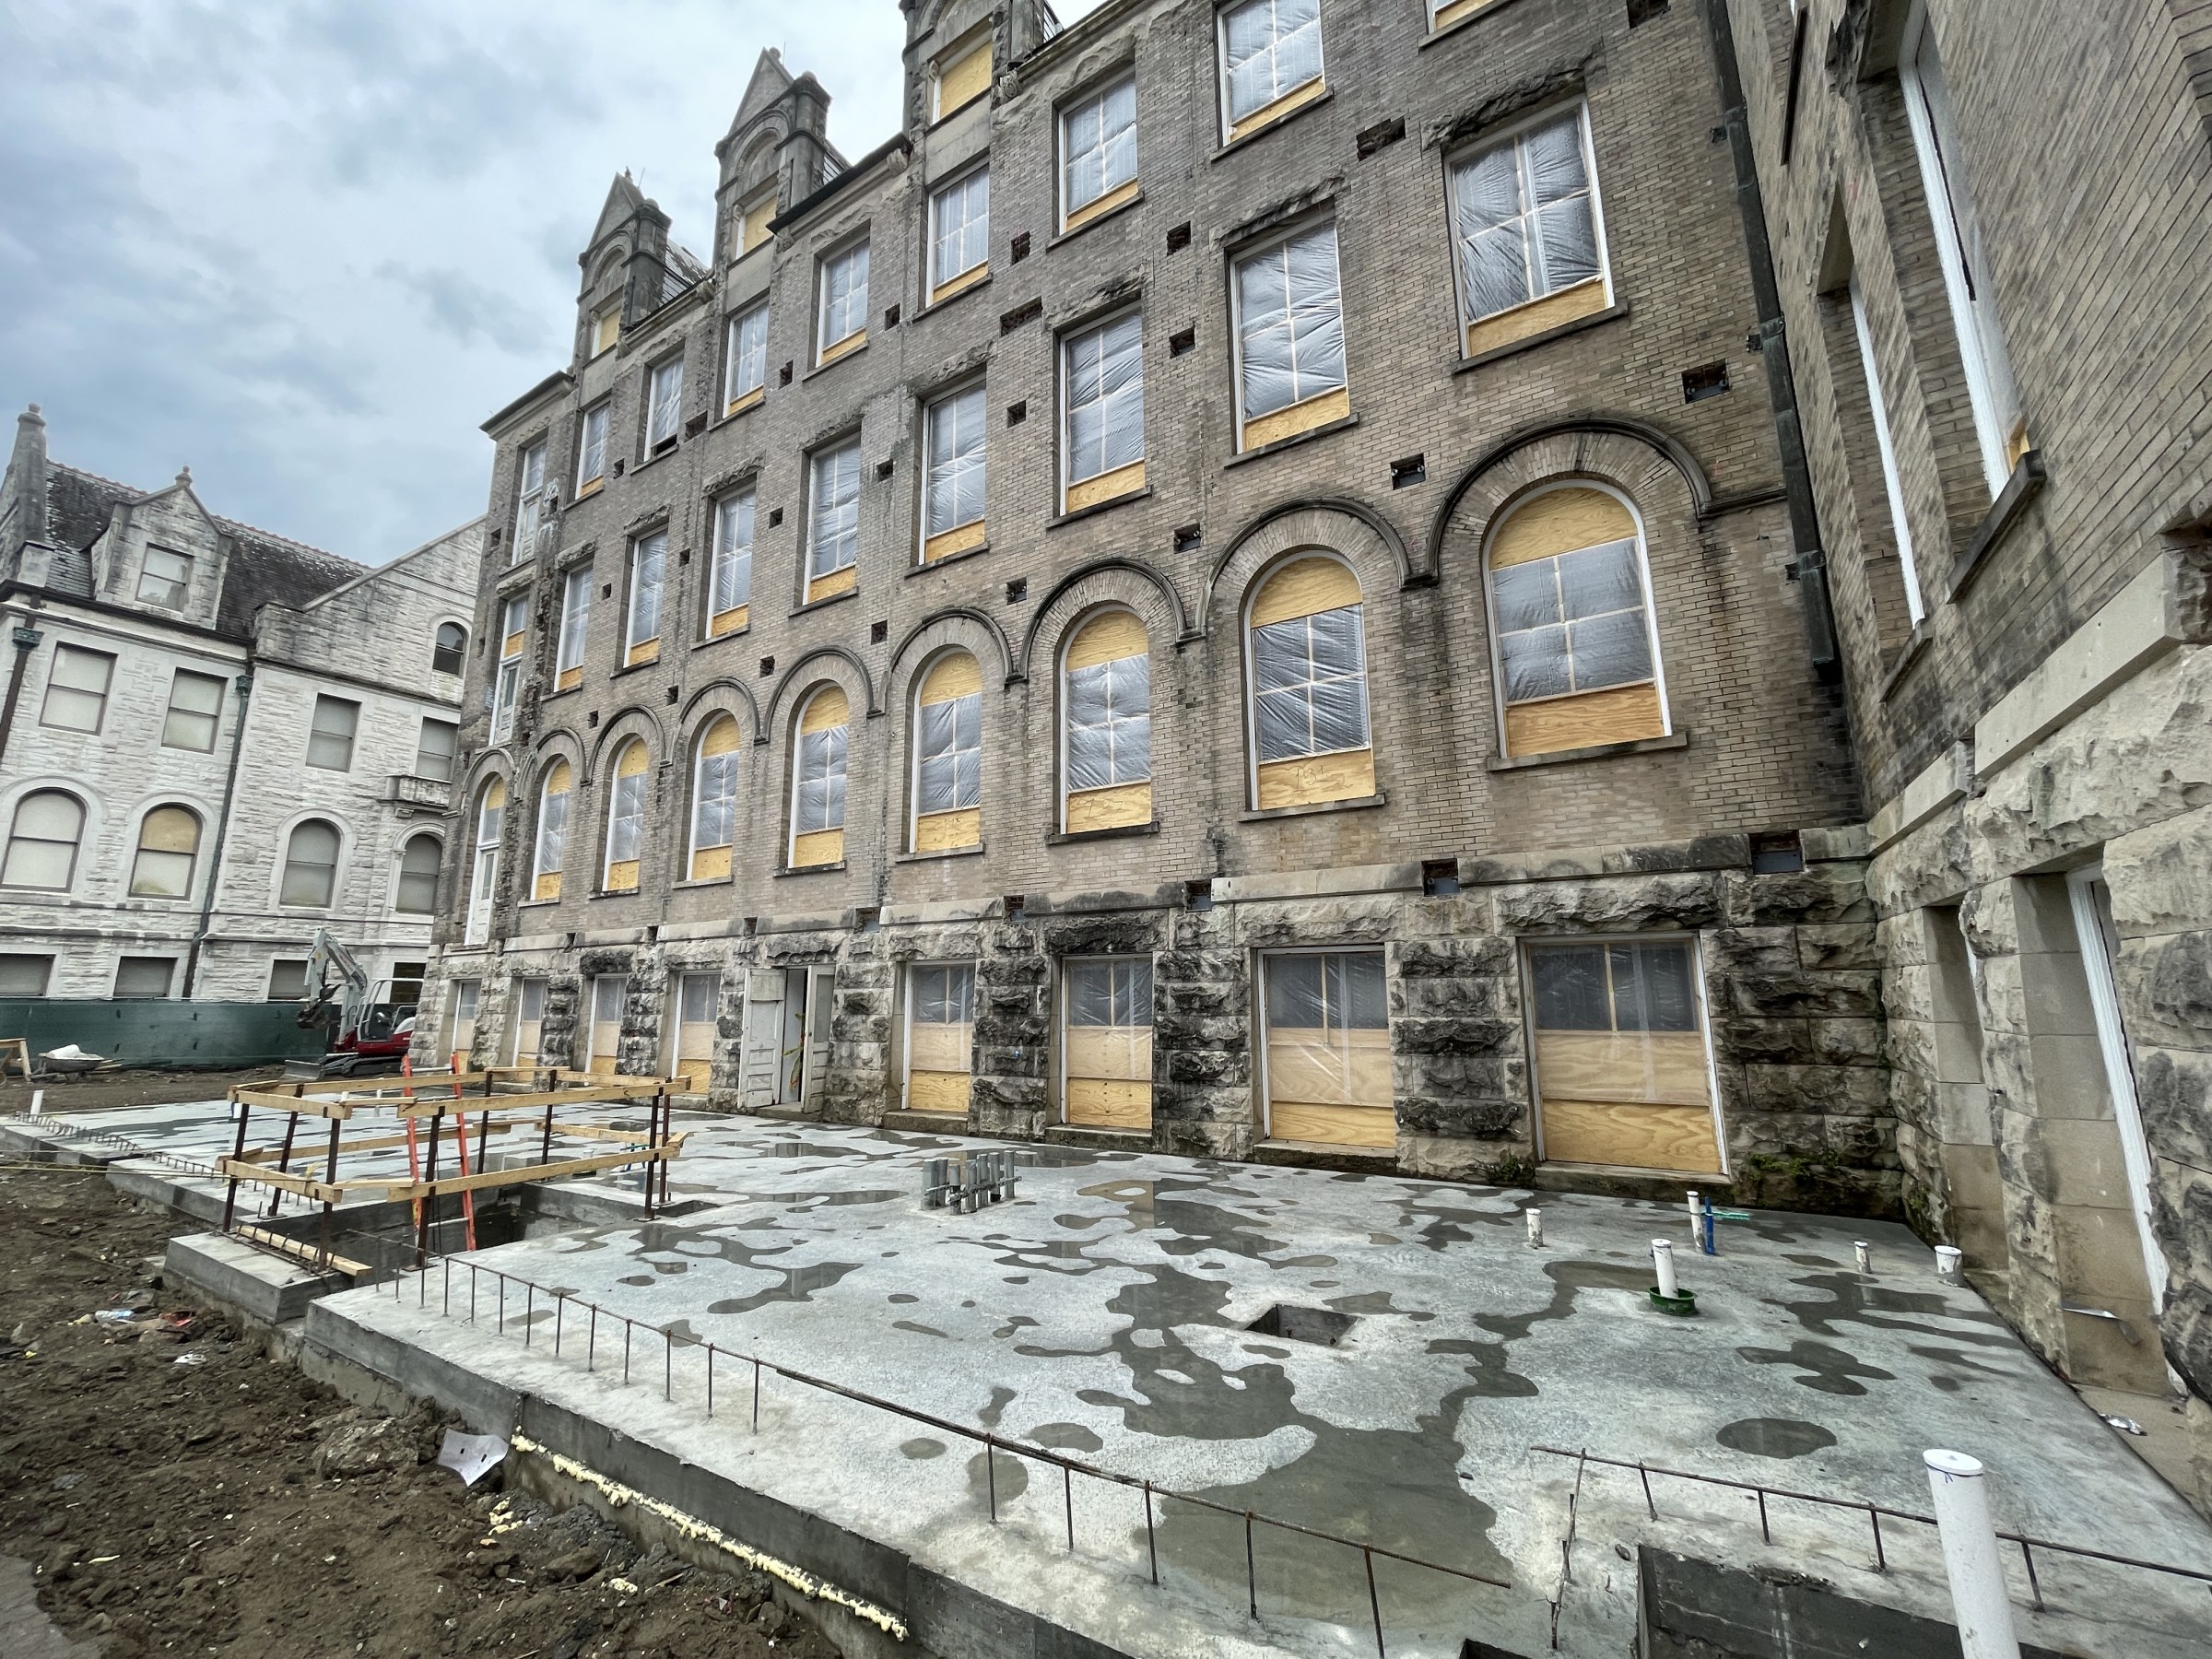 Exterior view of back facade at historic Richardson Memorial Hall with a new slab poured in the foreground, showing the footprint of the building's addition that will be built.